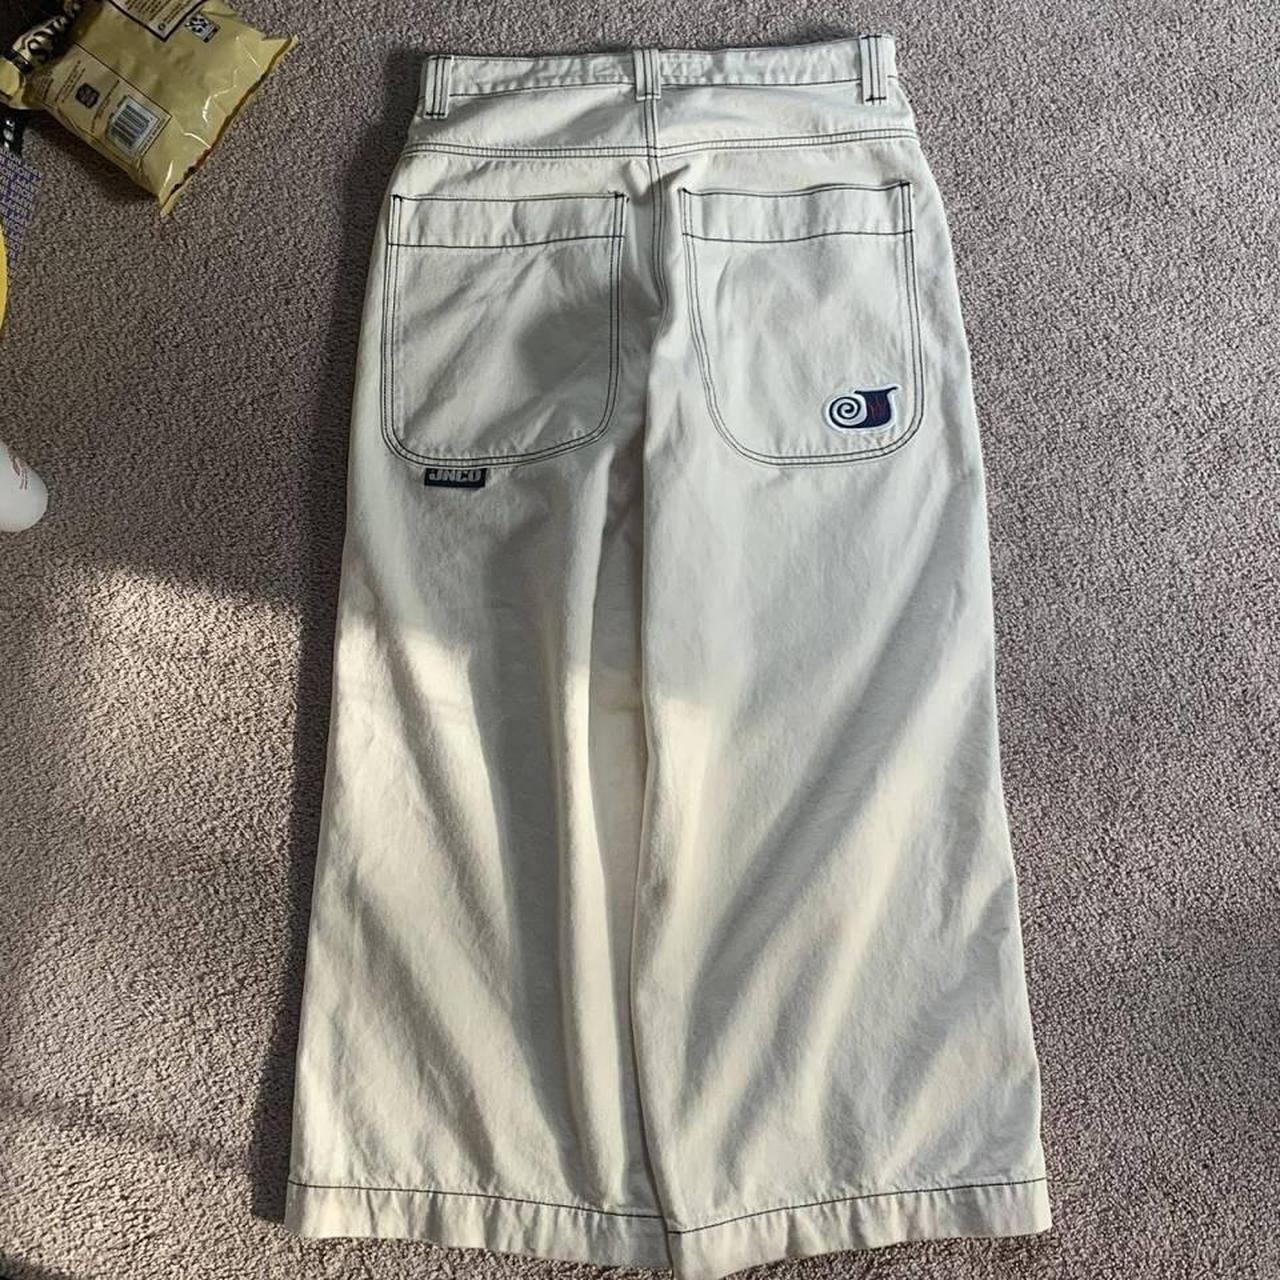 JNCO jeans vintage rare white twin cannons y2k... - Depop